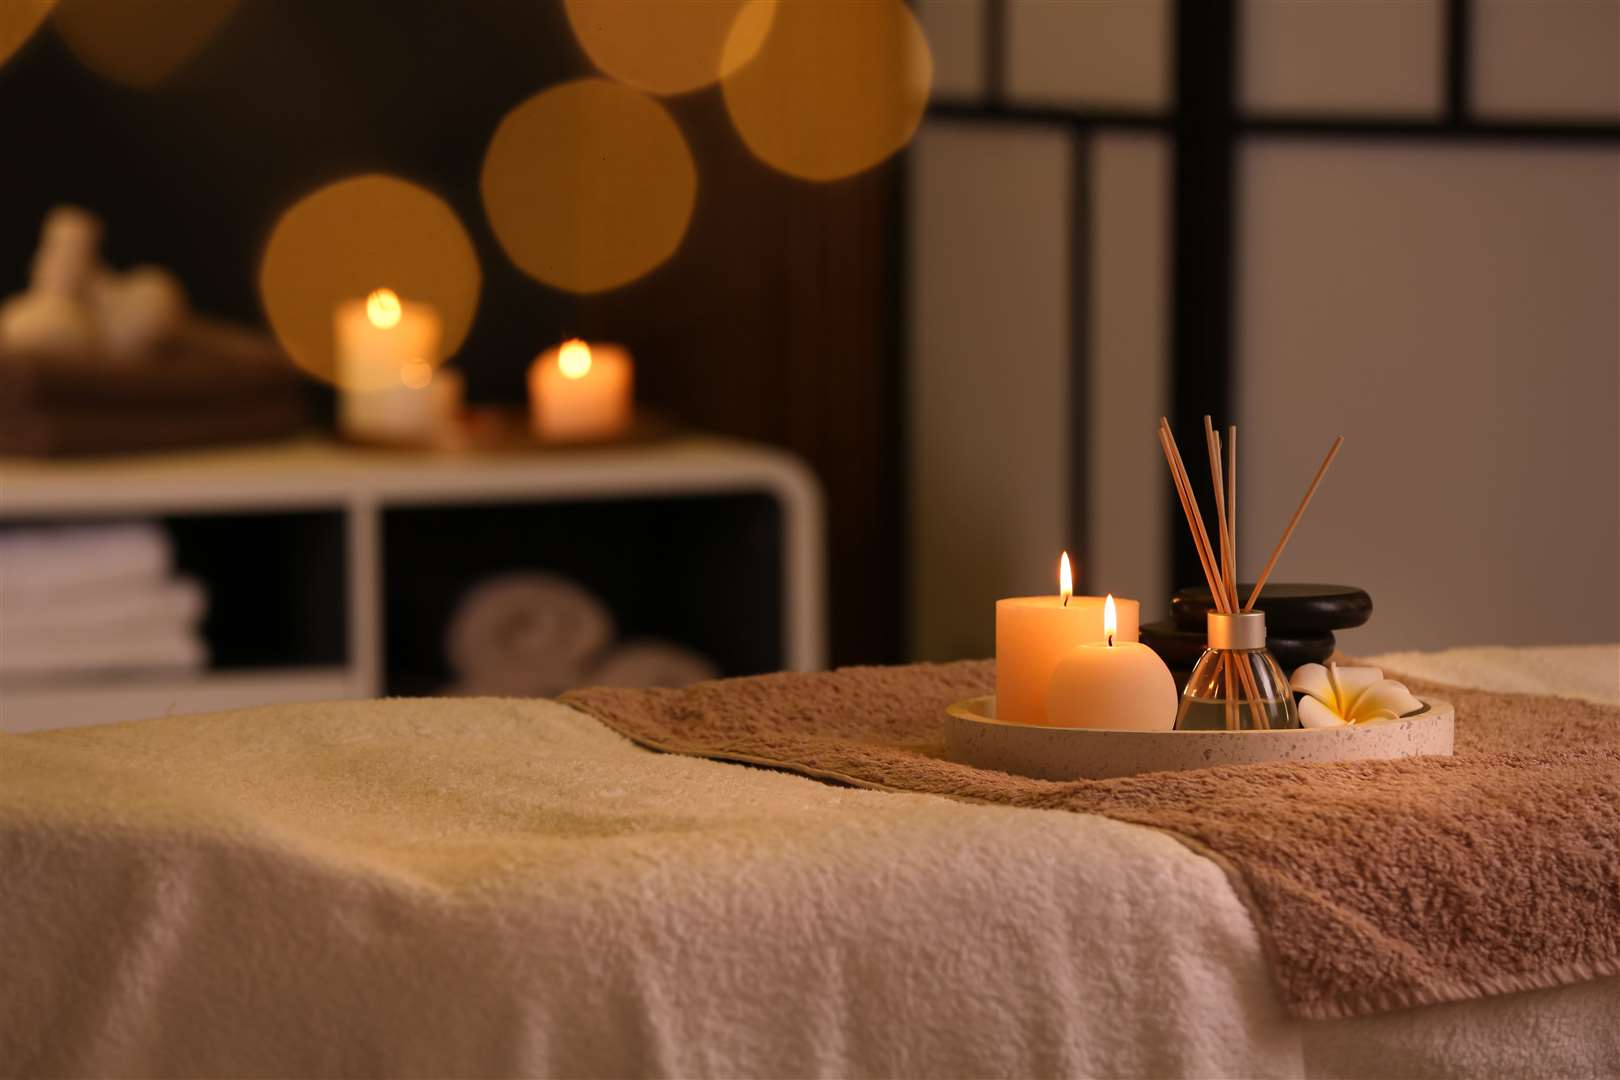 Candles and aromatherapy can create good feelings.